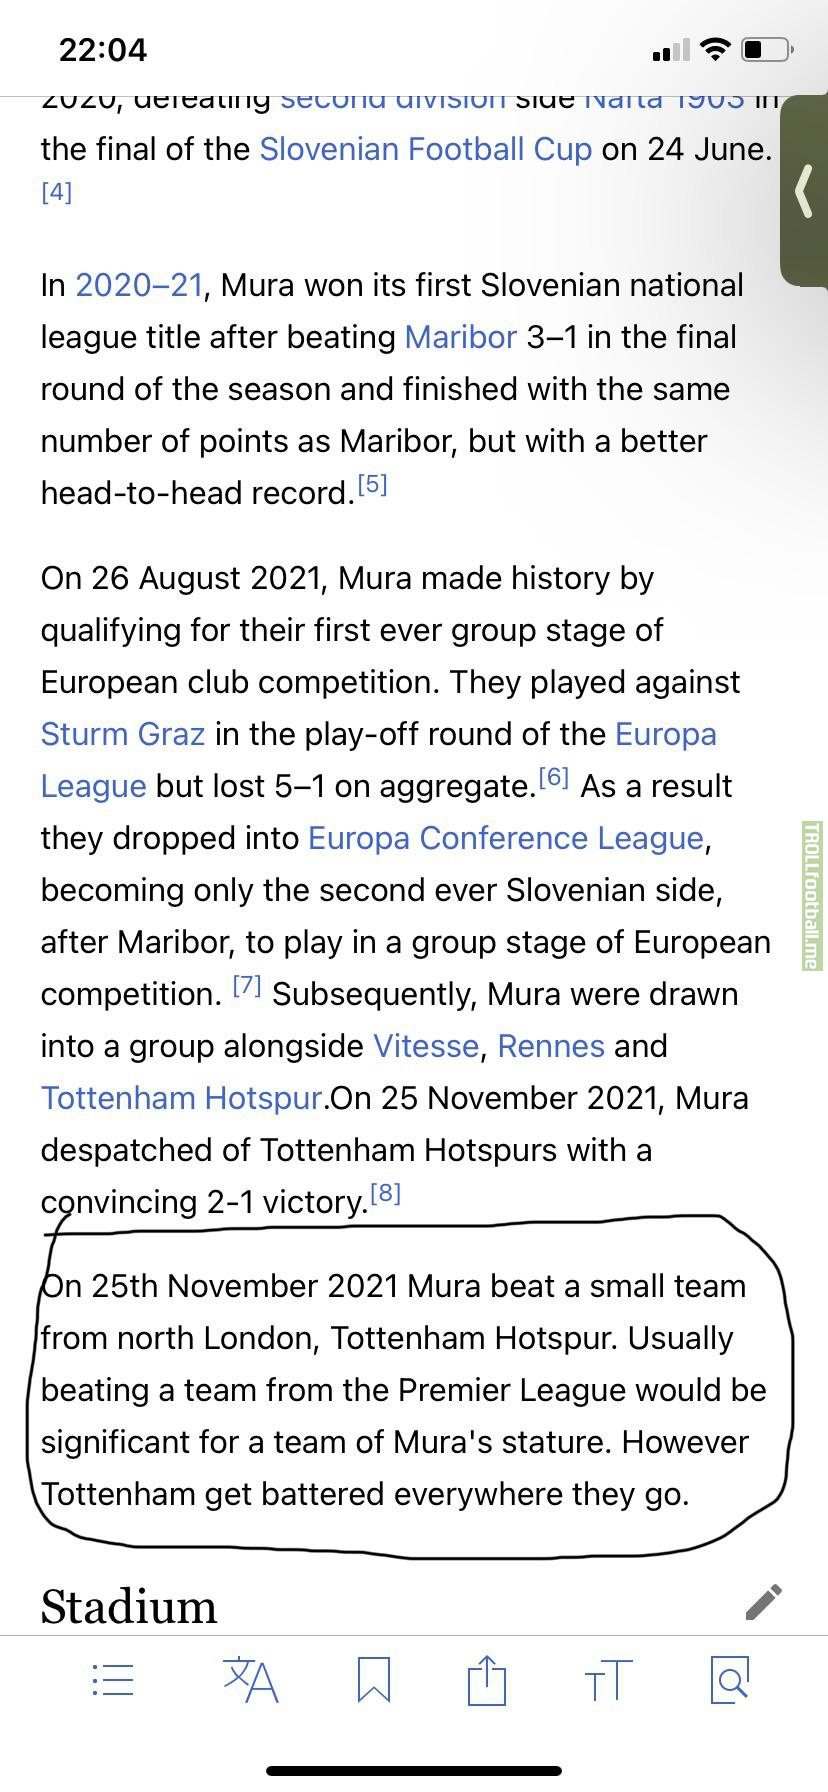 From the Wikipedia article of NS Mura, after beating the Spurs.